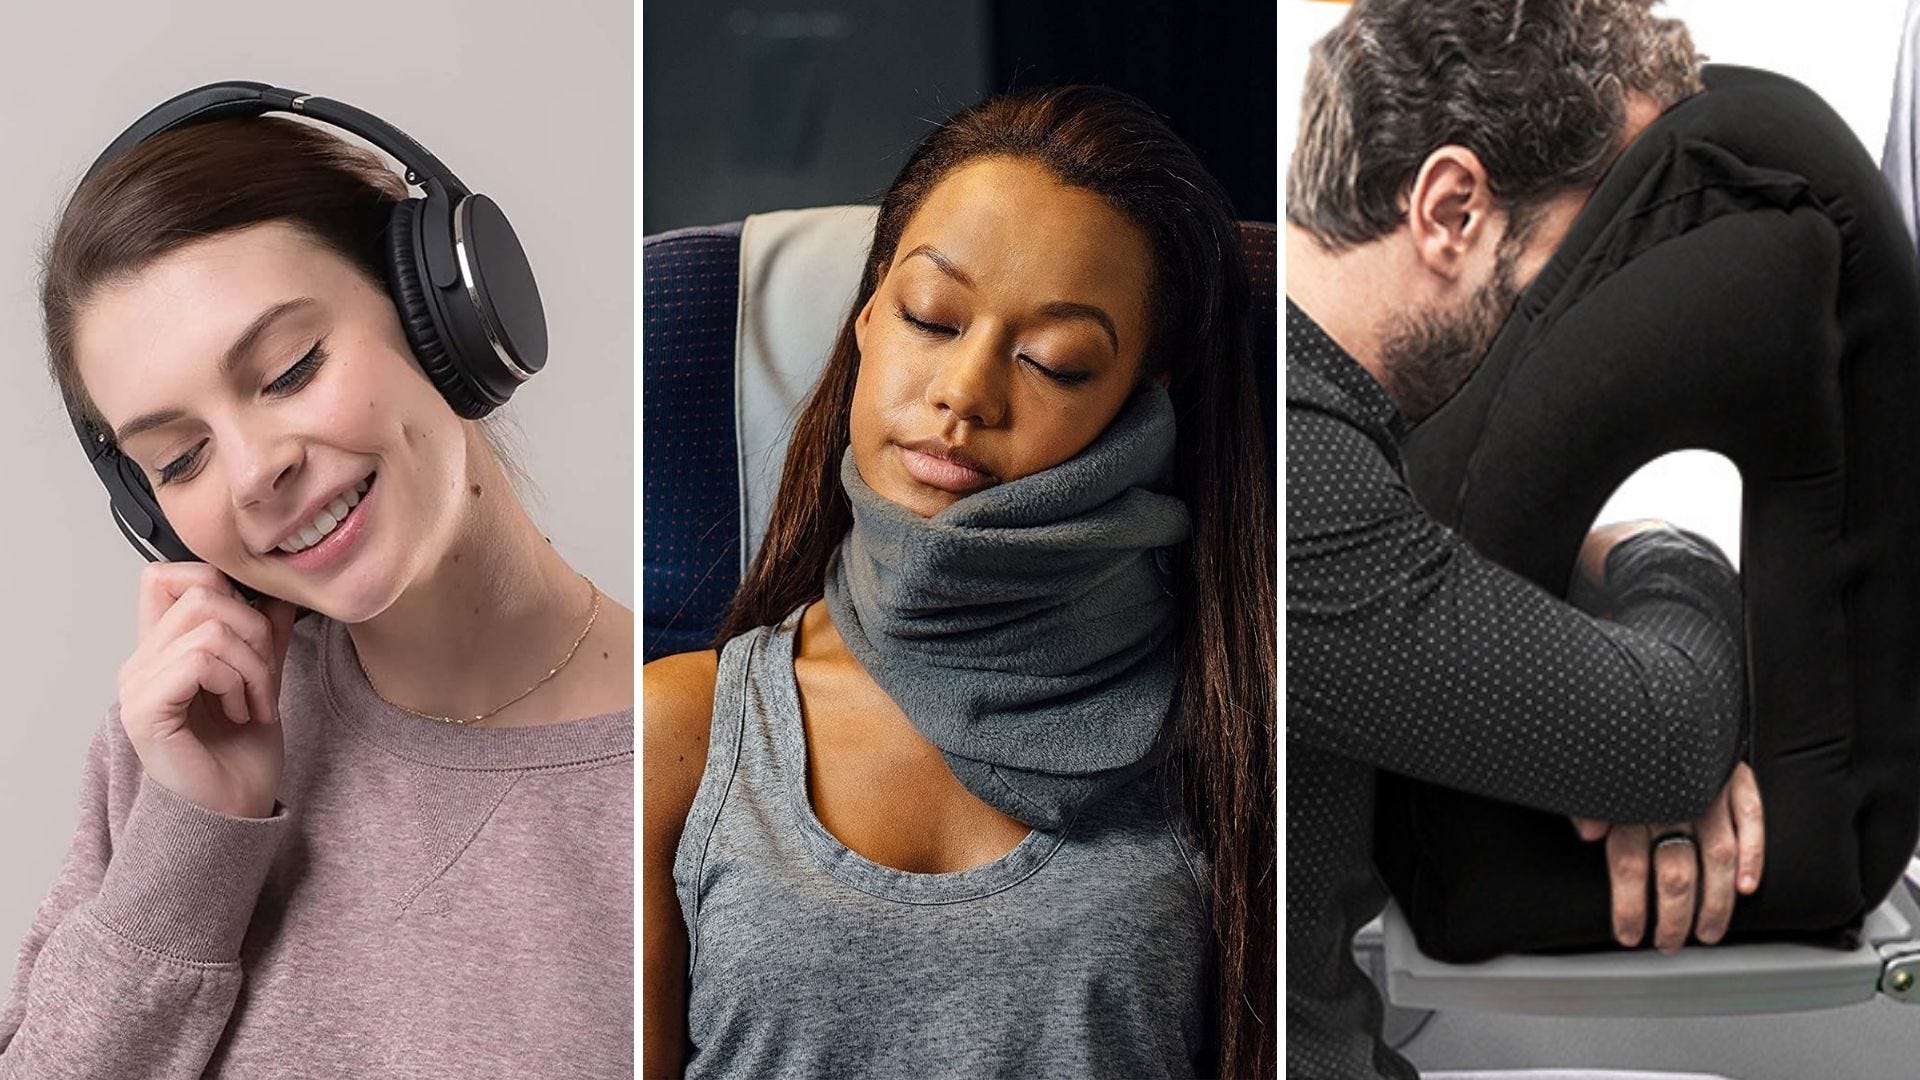 9 Things That’ll Make Your Long Economy Flight Suck Less